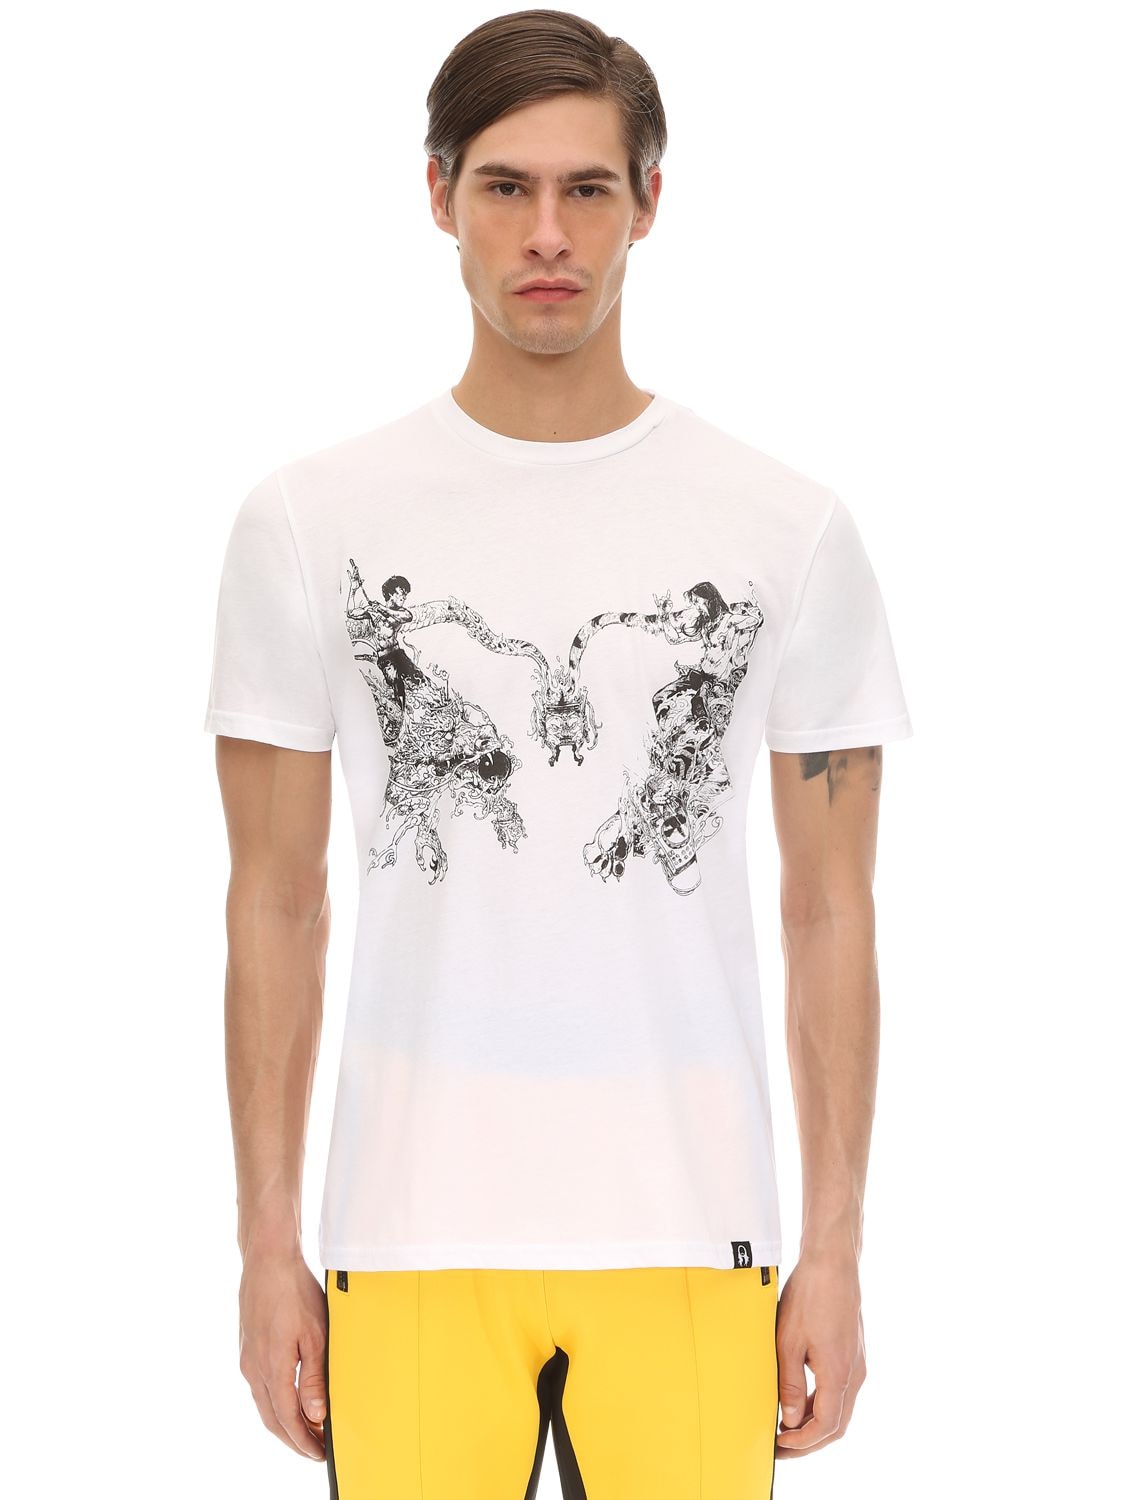 Dim Mak Collection Lvr Edition Cotton T-shirt By Kimjung Gi In White